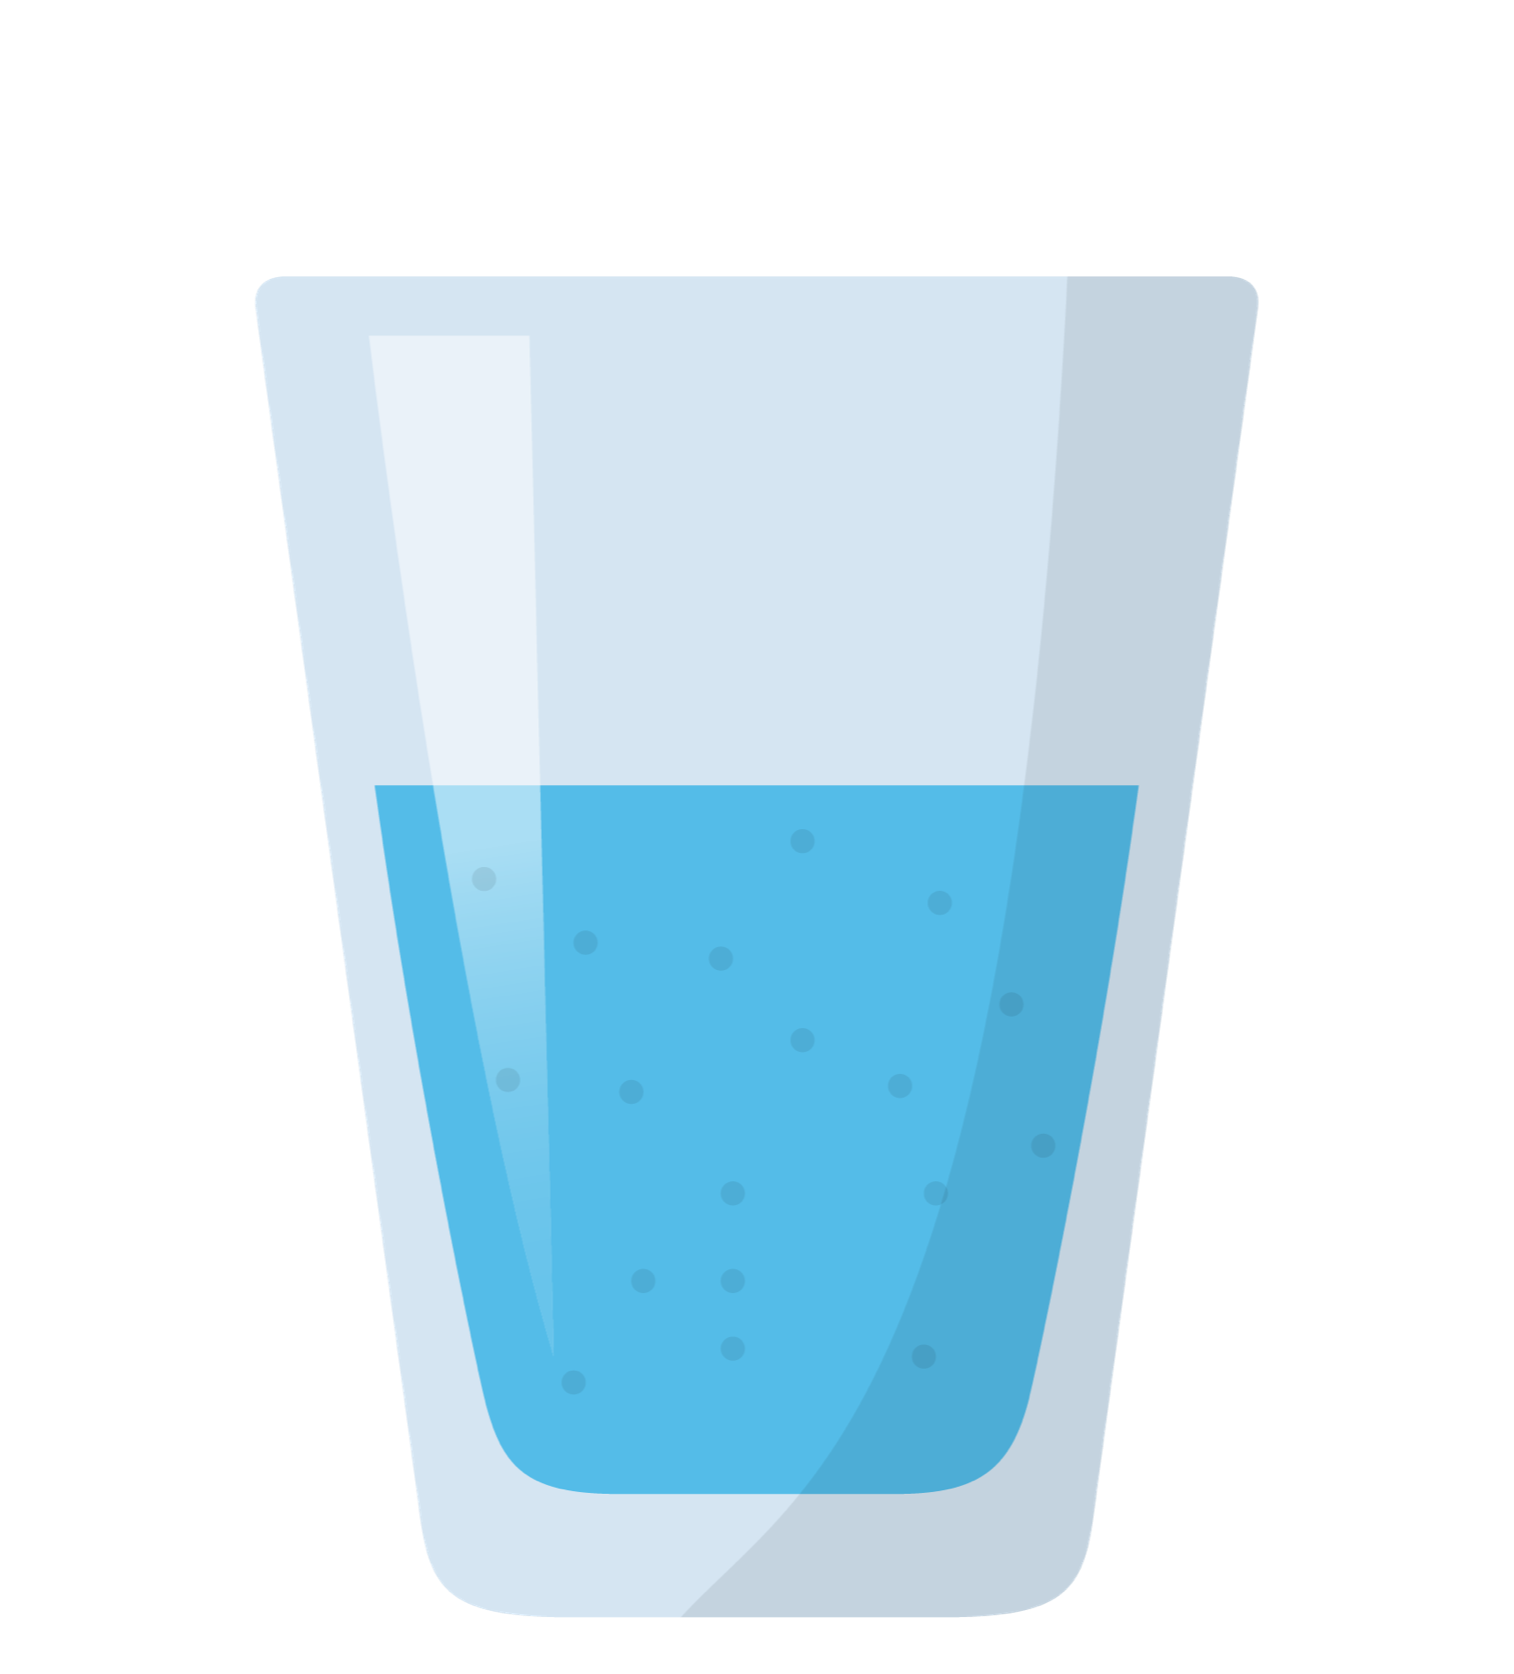 A cartoon drawing of a glass of water with black dots